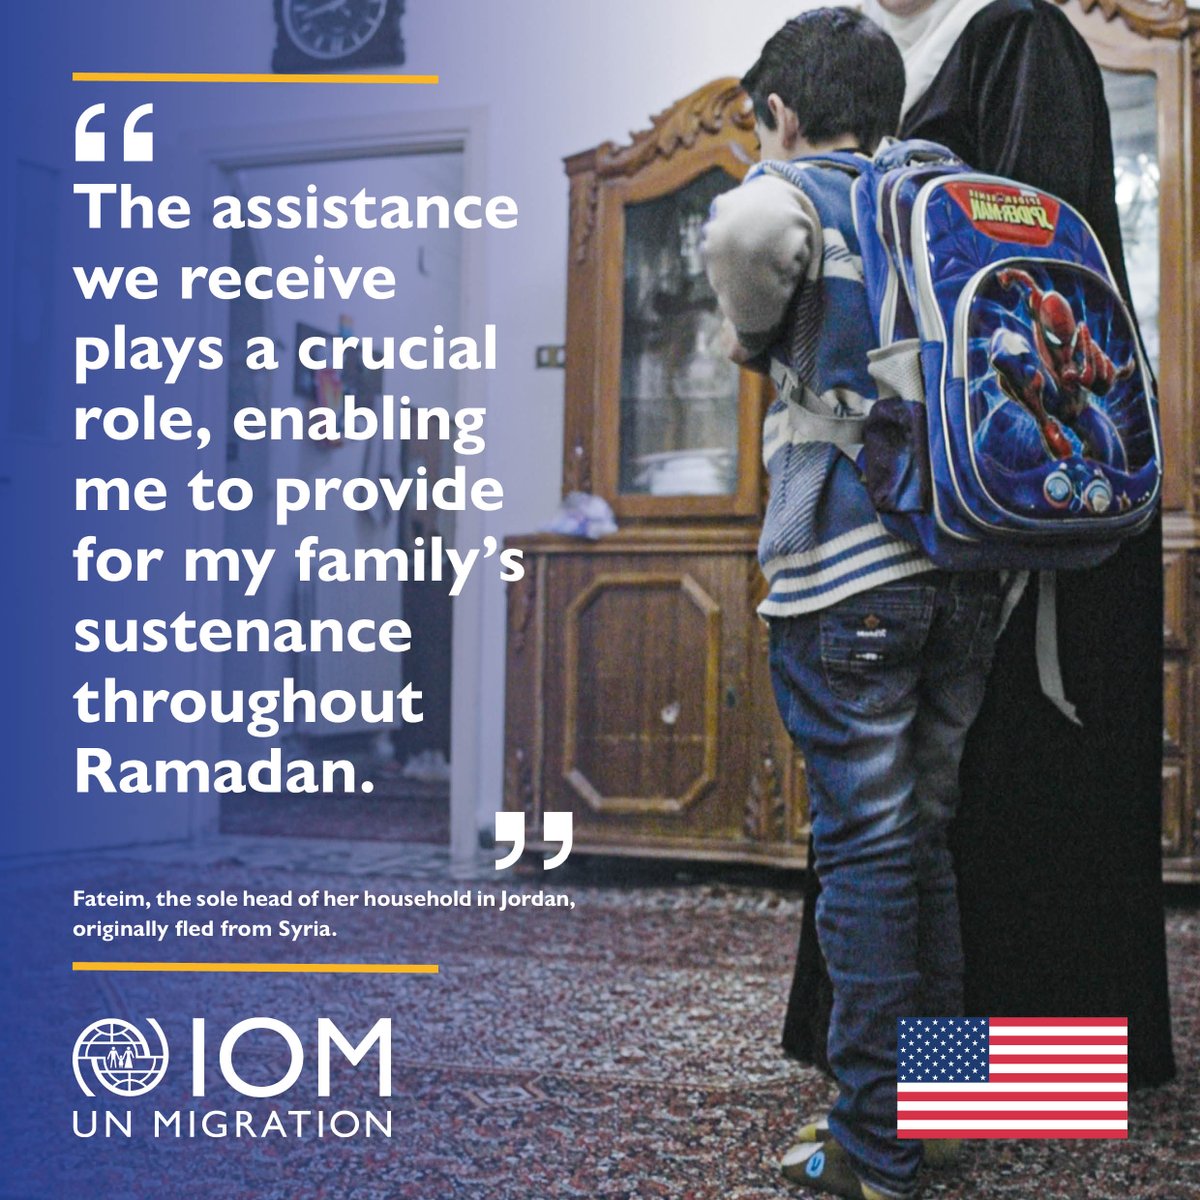 Fateim is a Syrian refugee in Jordan and a single parent. To support her family during the month of Ramadan she received vital cash assistance from @StatePRM through IOM’s Multi-Purpose Cash Assistance and One-time Winter Cash Assistance Programmes.